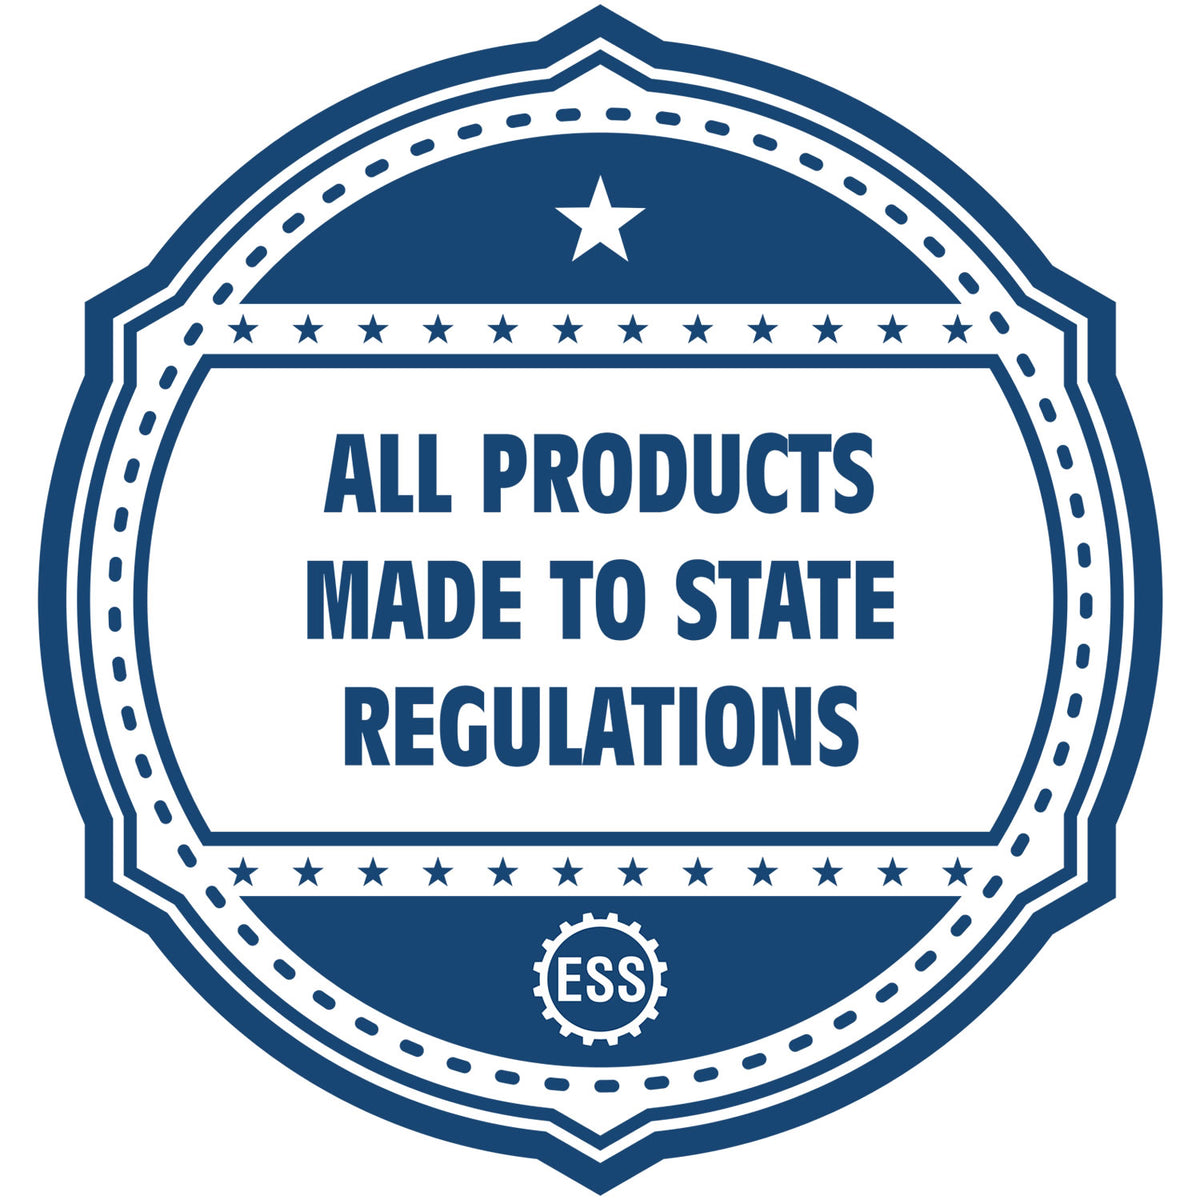 An icon or badge element for the Premium MaxLight Pre-Inked Illinois Engineering Stamp showing that this product is made in compliance with state regulations.